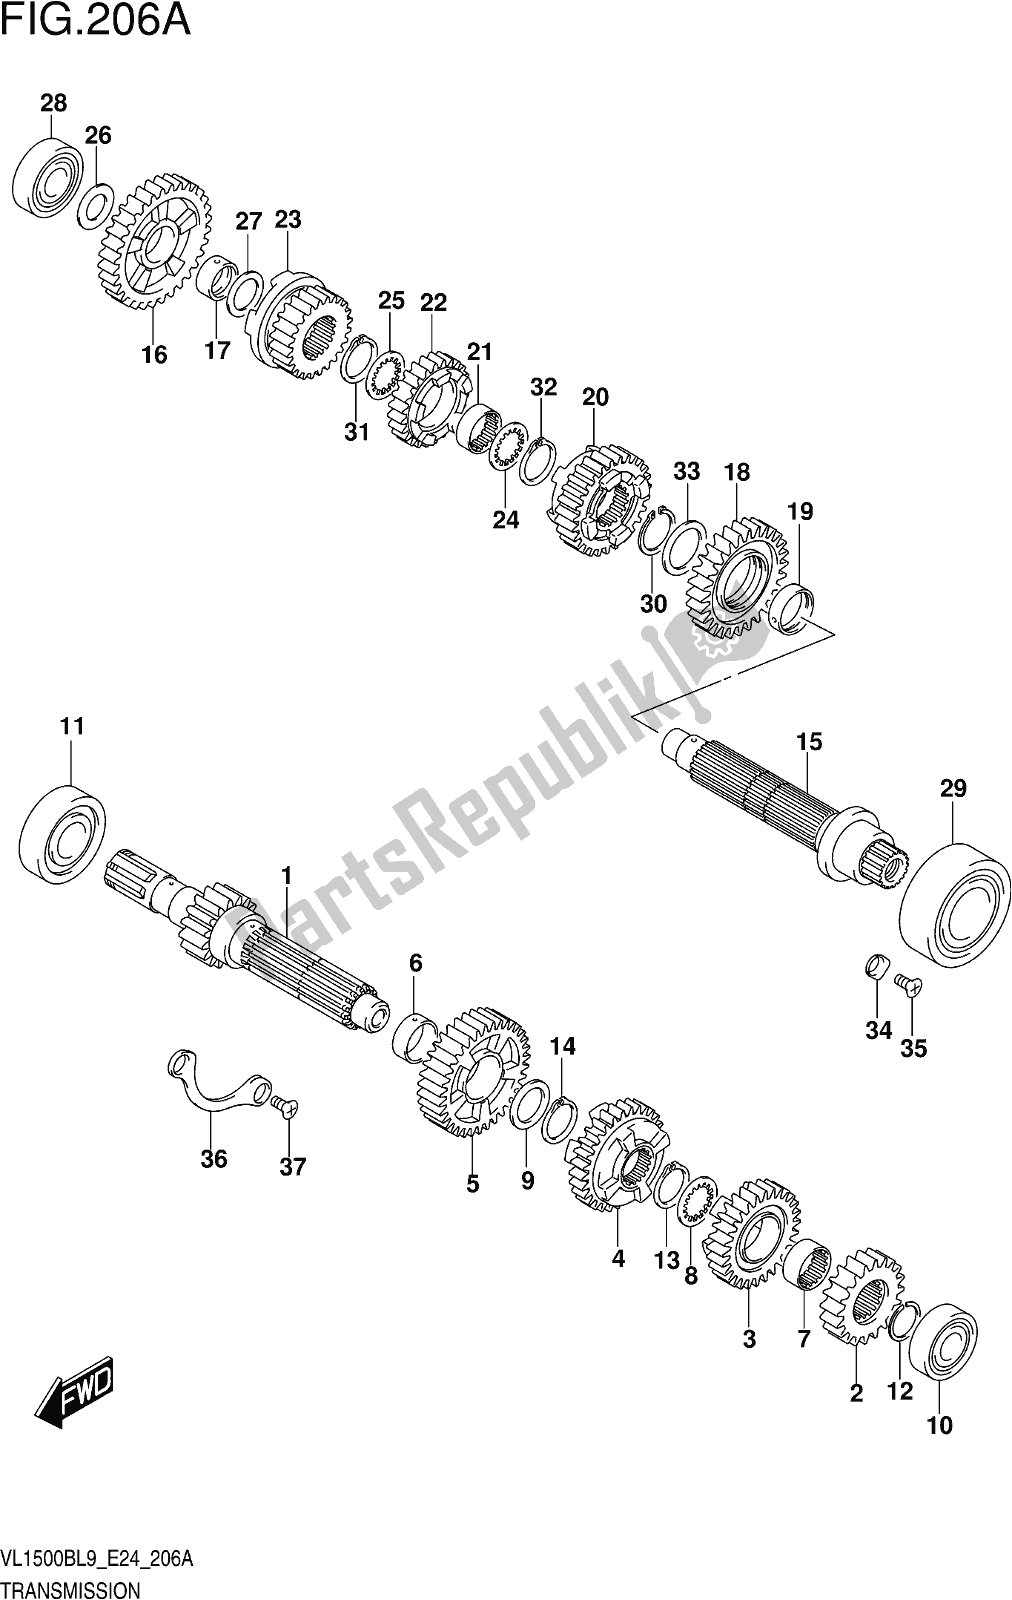 All parts for the Fig. 206a Transmission of the Suzuki VL 1500B 2019